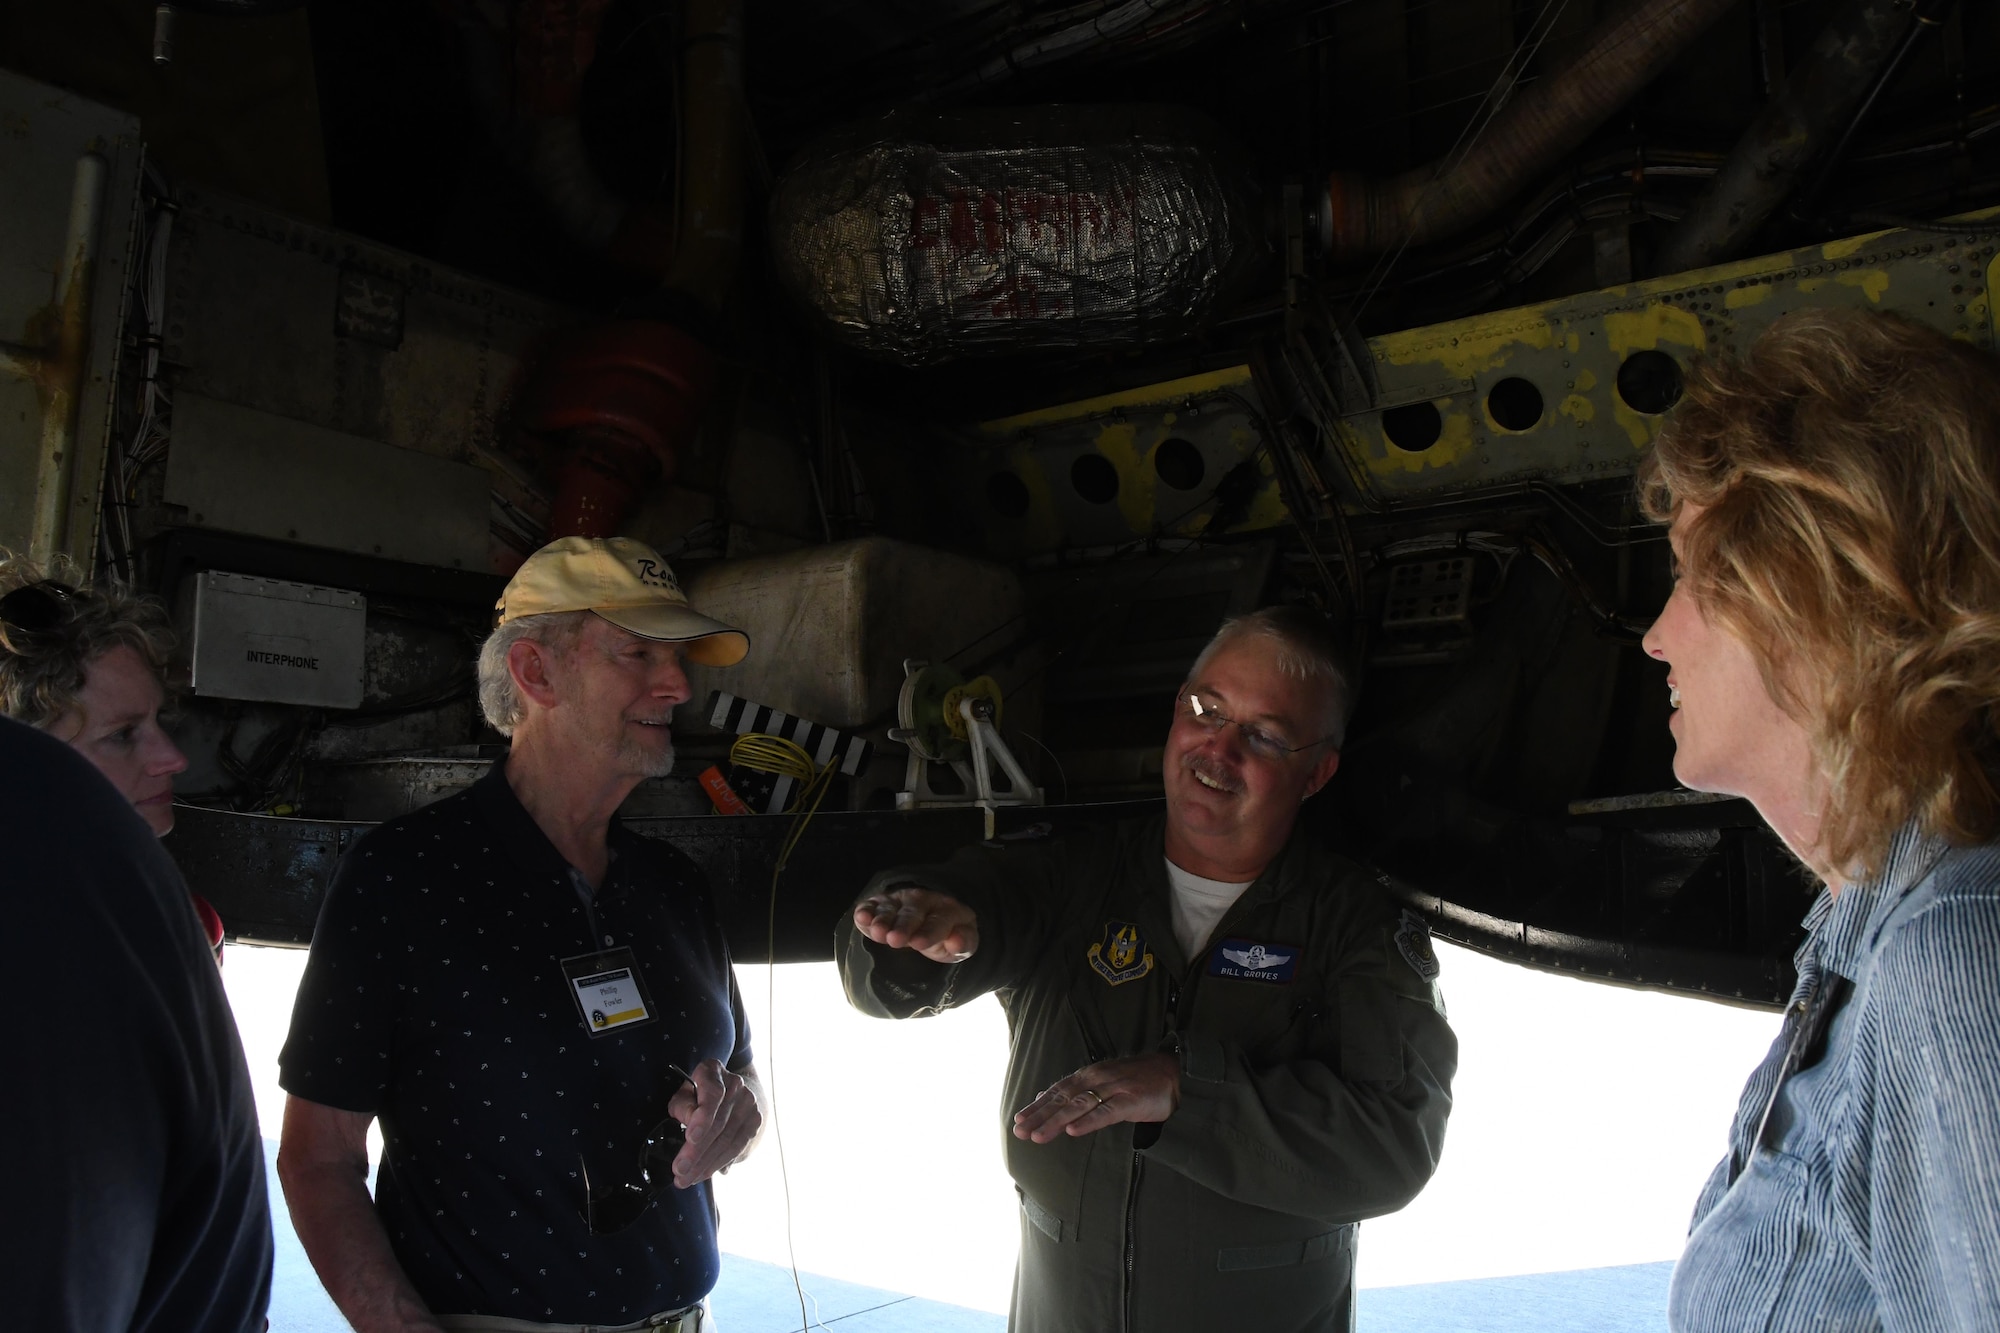 Lt. Col. William Groves, assigned to the 93rd Bomb Squadron, 307th Bomb Wing, Barksdale Air Force Base, La., tells a group of 307th BW alumni about the B-52 Stratofortress during a base tour on Barksdale AFB, March 31, 2017. The alumni were invited to the base for a tour during a reunion to celebrate the 75th anniversary of the unit. (U.S. Air Force photo by Staff Sgt. Callie Ware/Released)